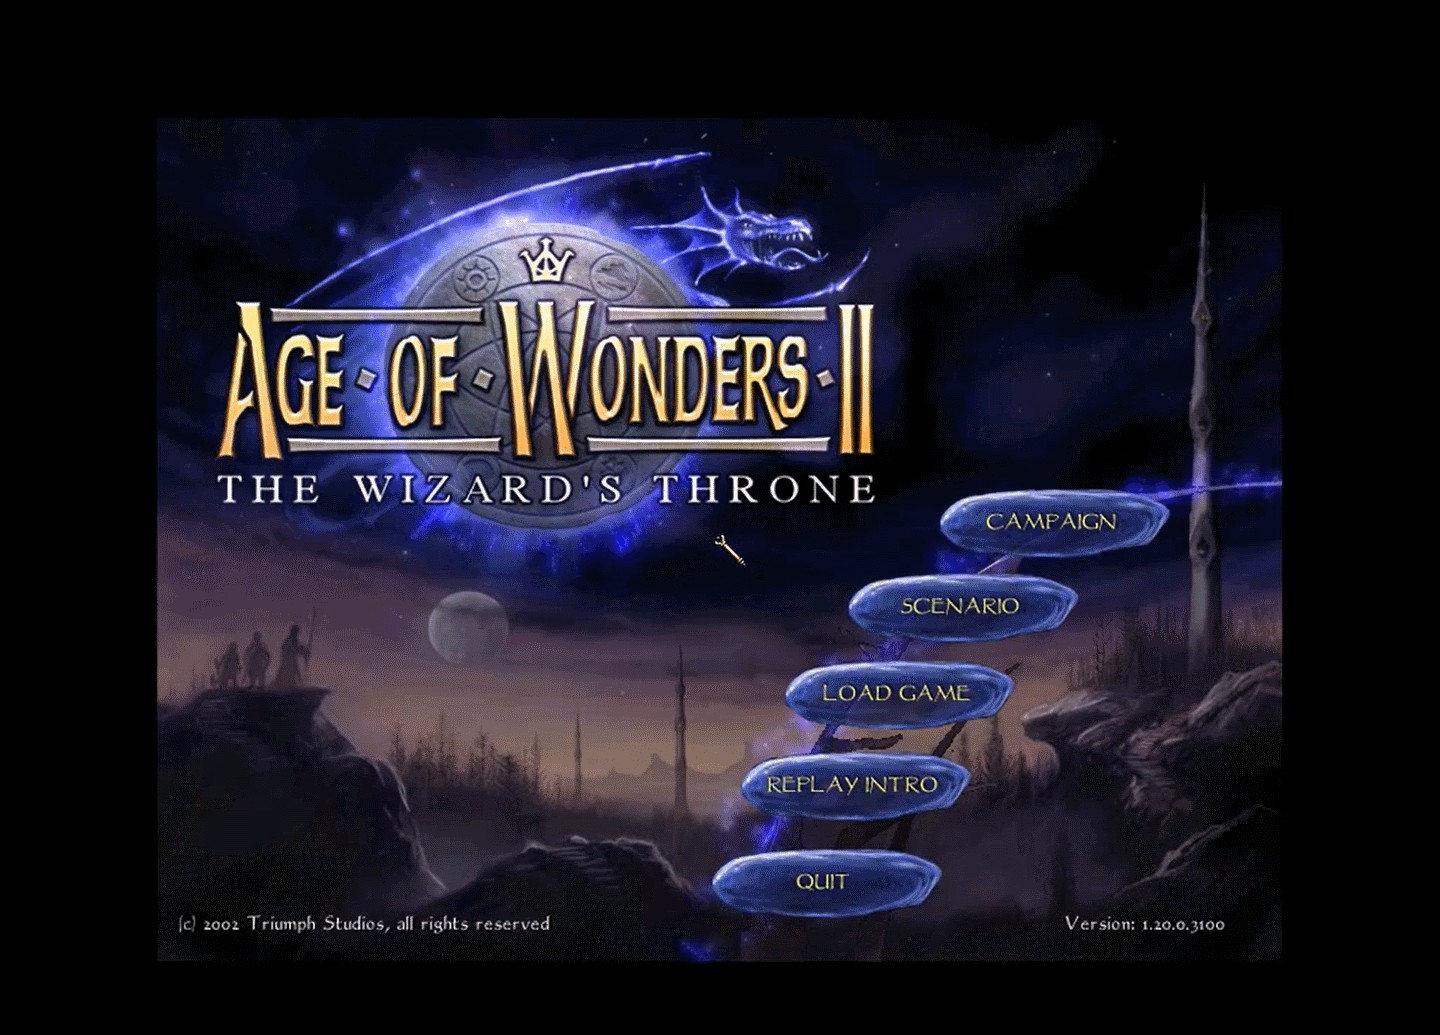 AGE OF WONDERS II: THE WIZARD'S THRONE